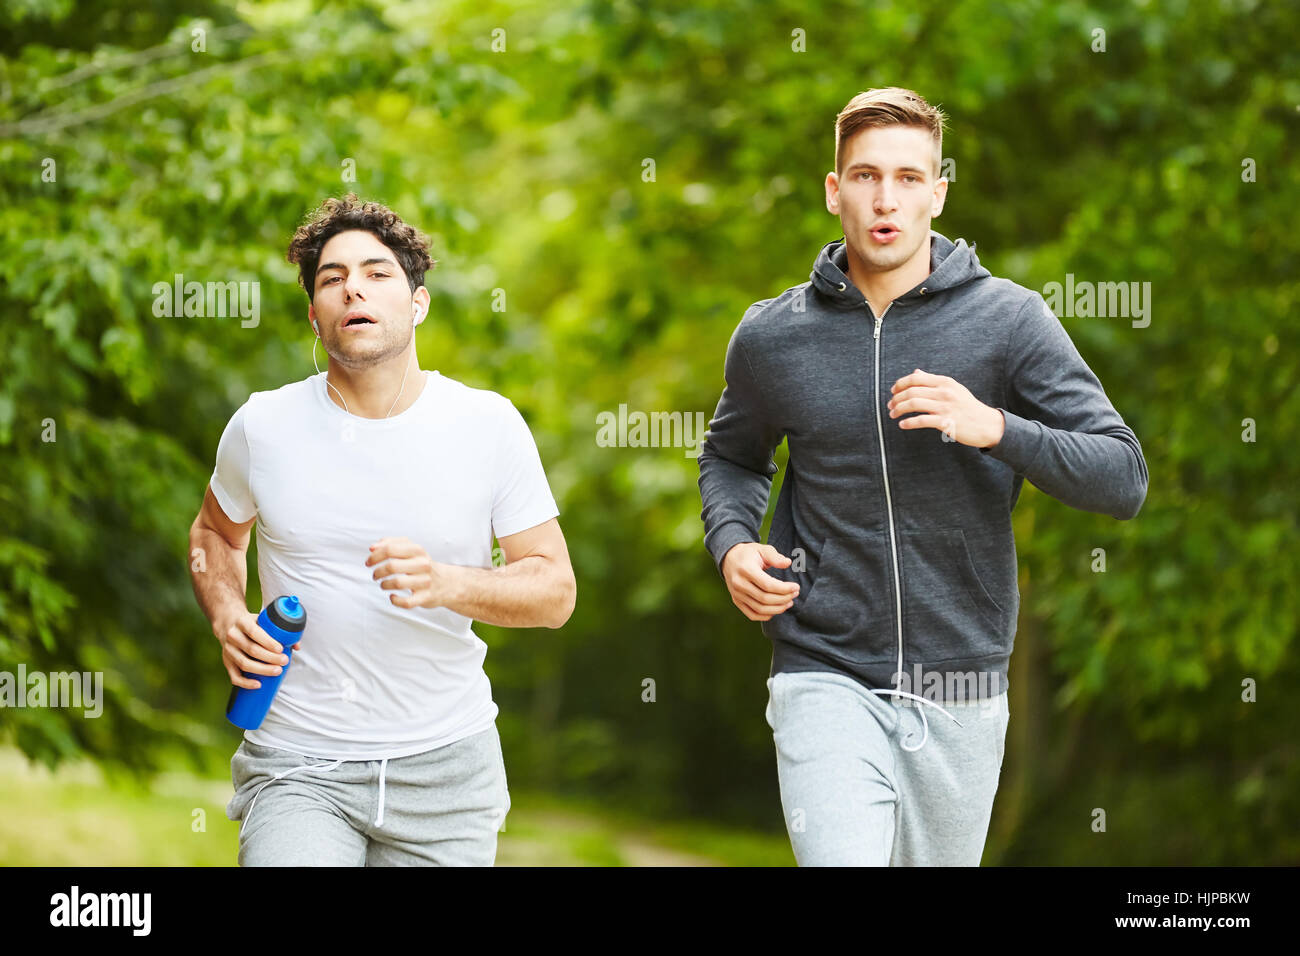 Two young men jogging at the park and training together Stock Photo